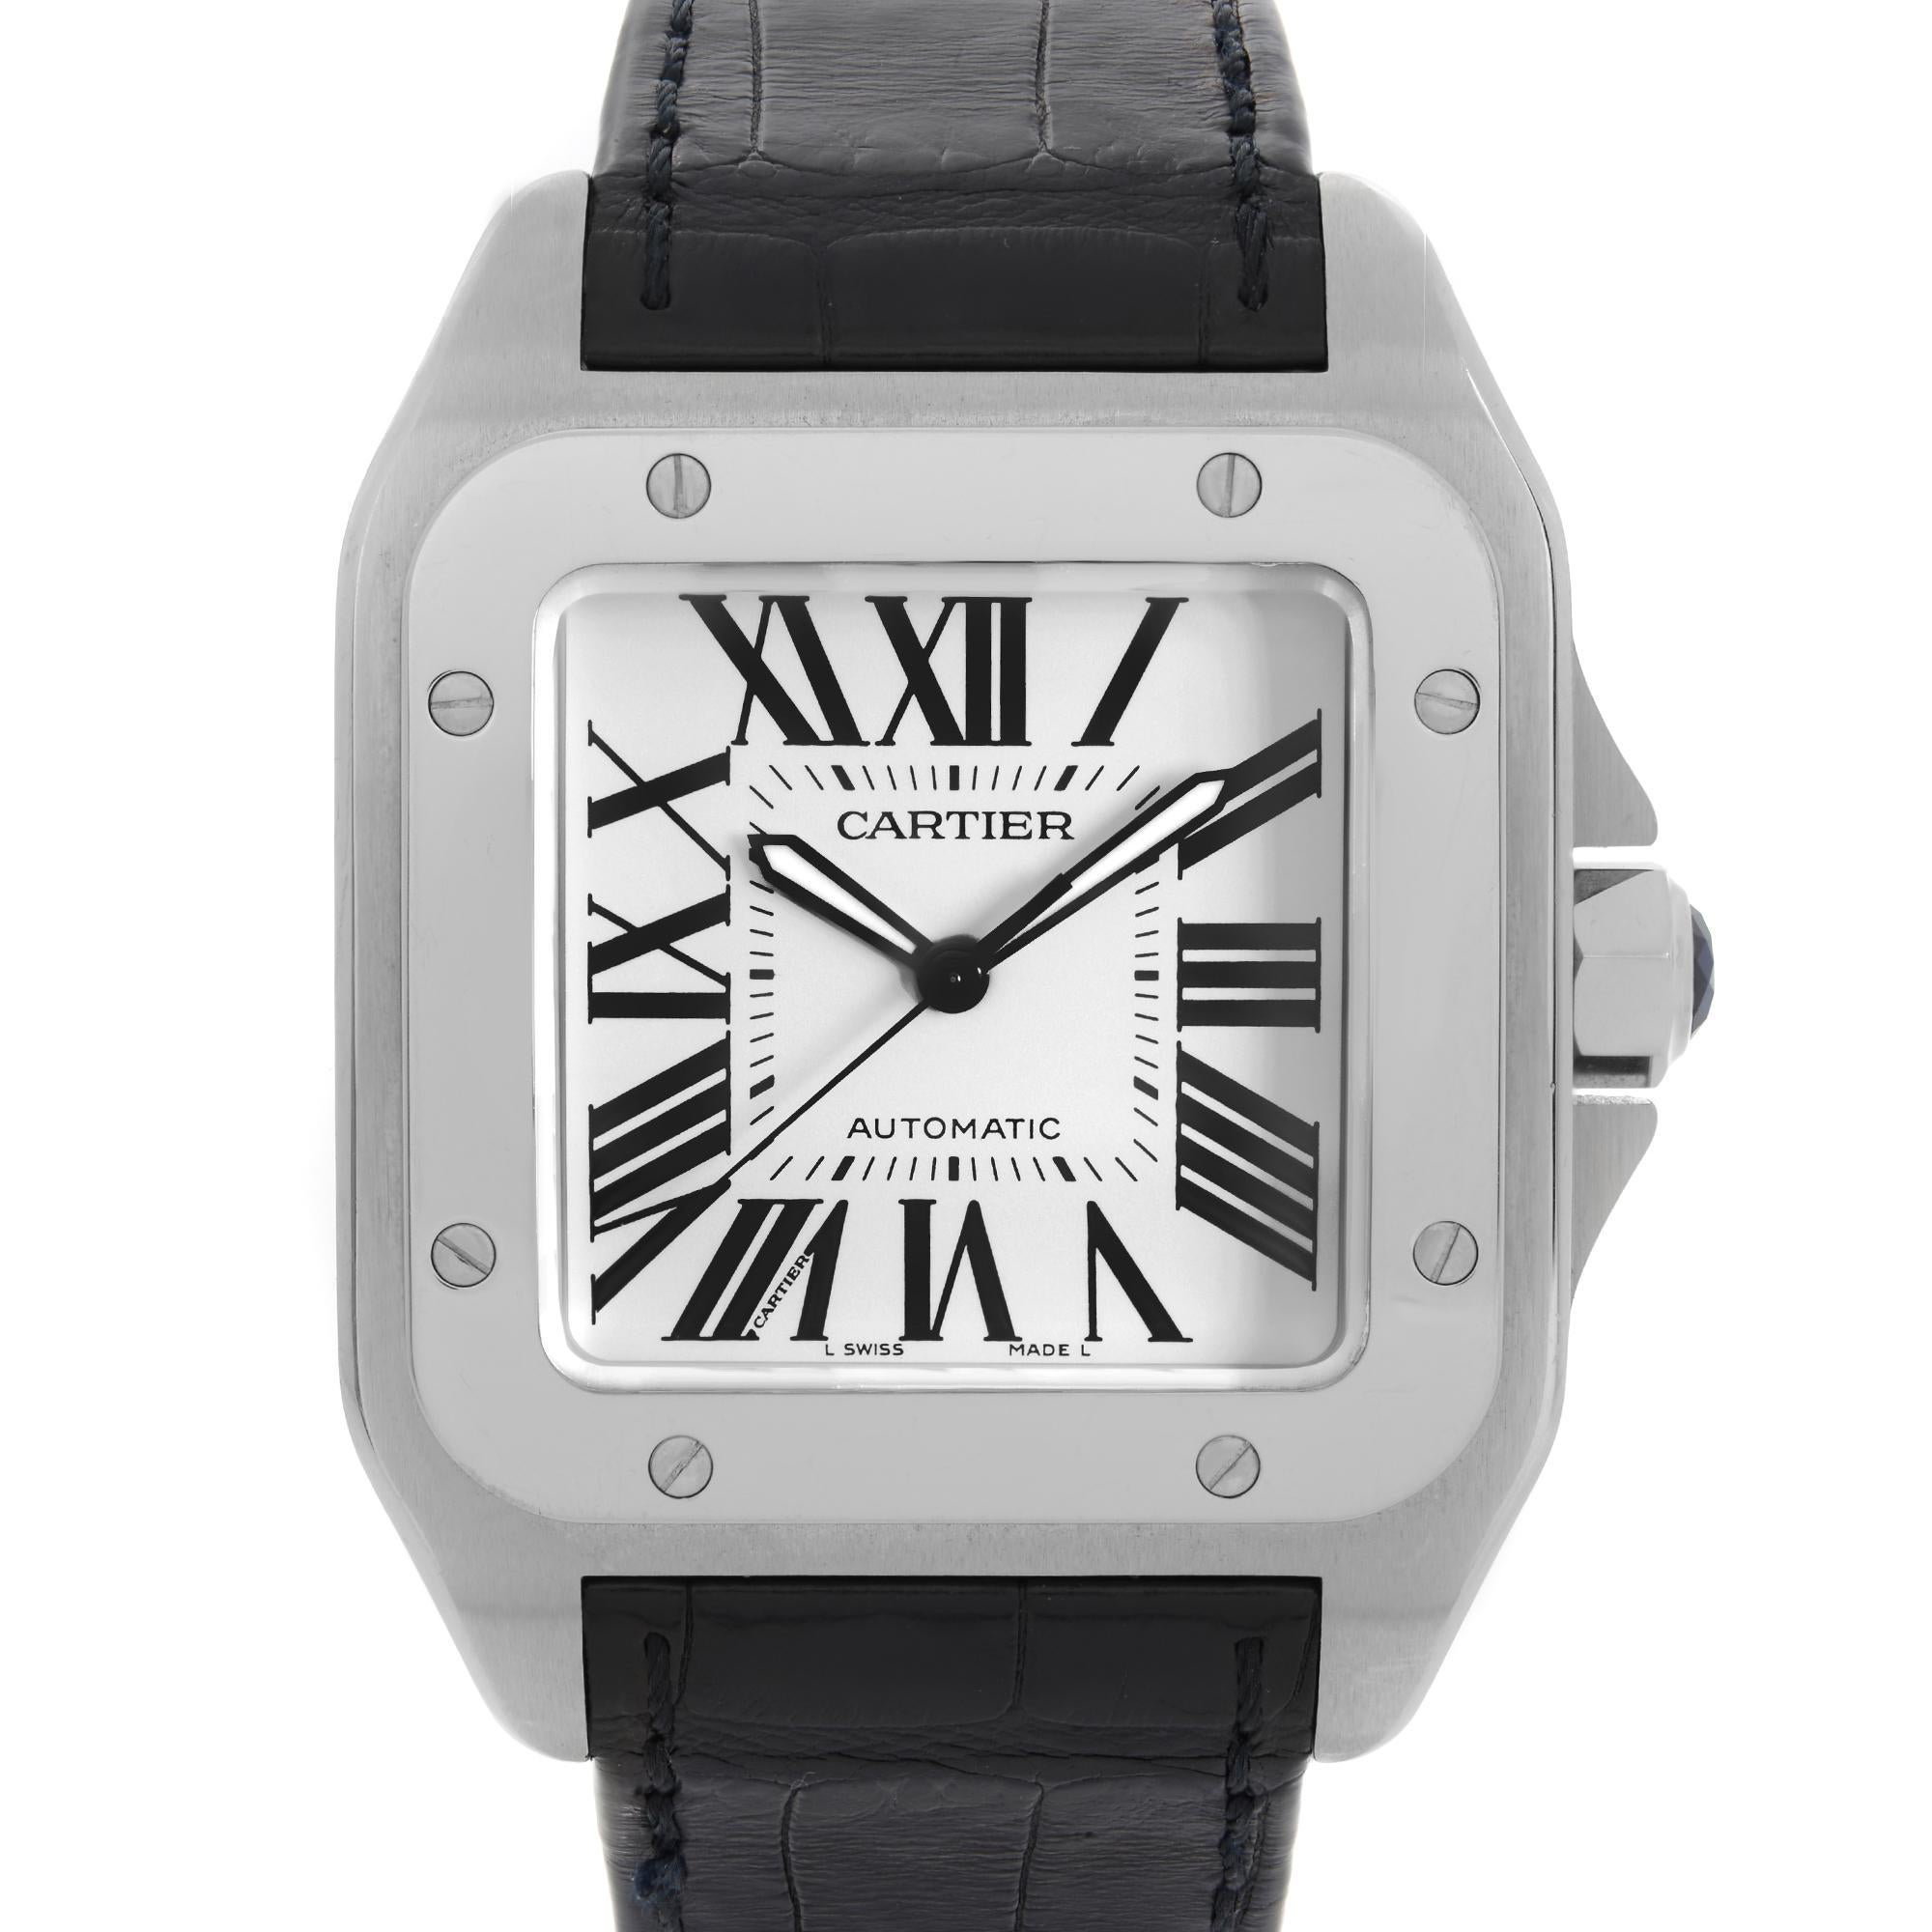 Pre-owned Cartier Santos 100 XL 38mm Stainless Steel White Roman Dial Automatic Men's Watch W20073X8  Ref-2656. This Beautiful Timepiece is Powered by Mechanical (Automatic) Movement And Features: Stainless Steel Case with Black Leather Strap. Fixed